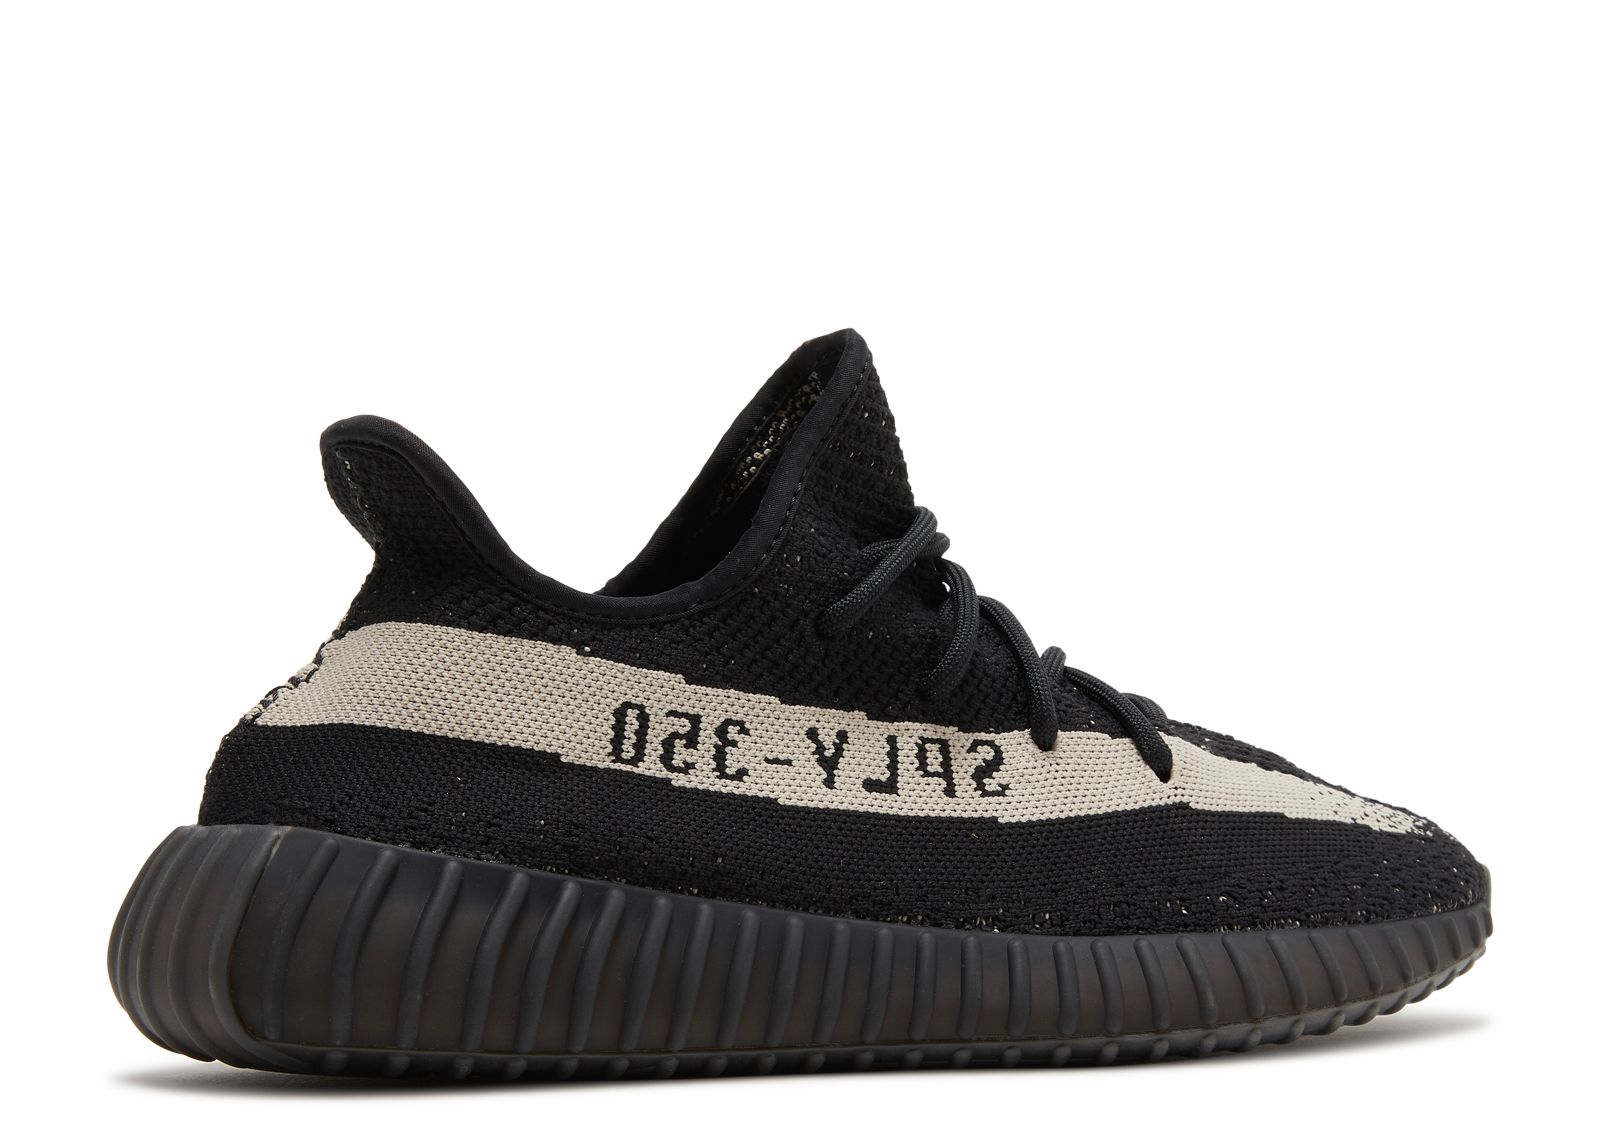 Cheap Yeezy Trainers, Cheap Yeezy Boost 